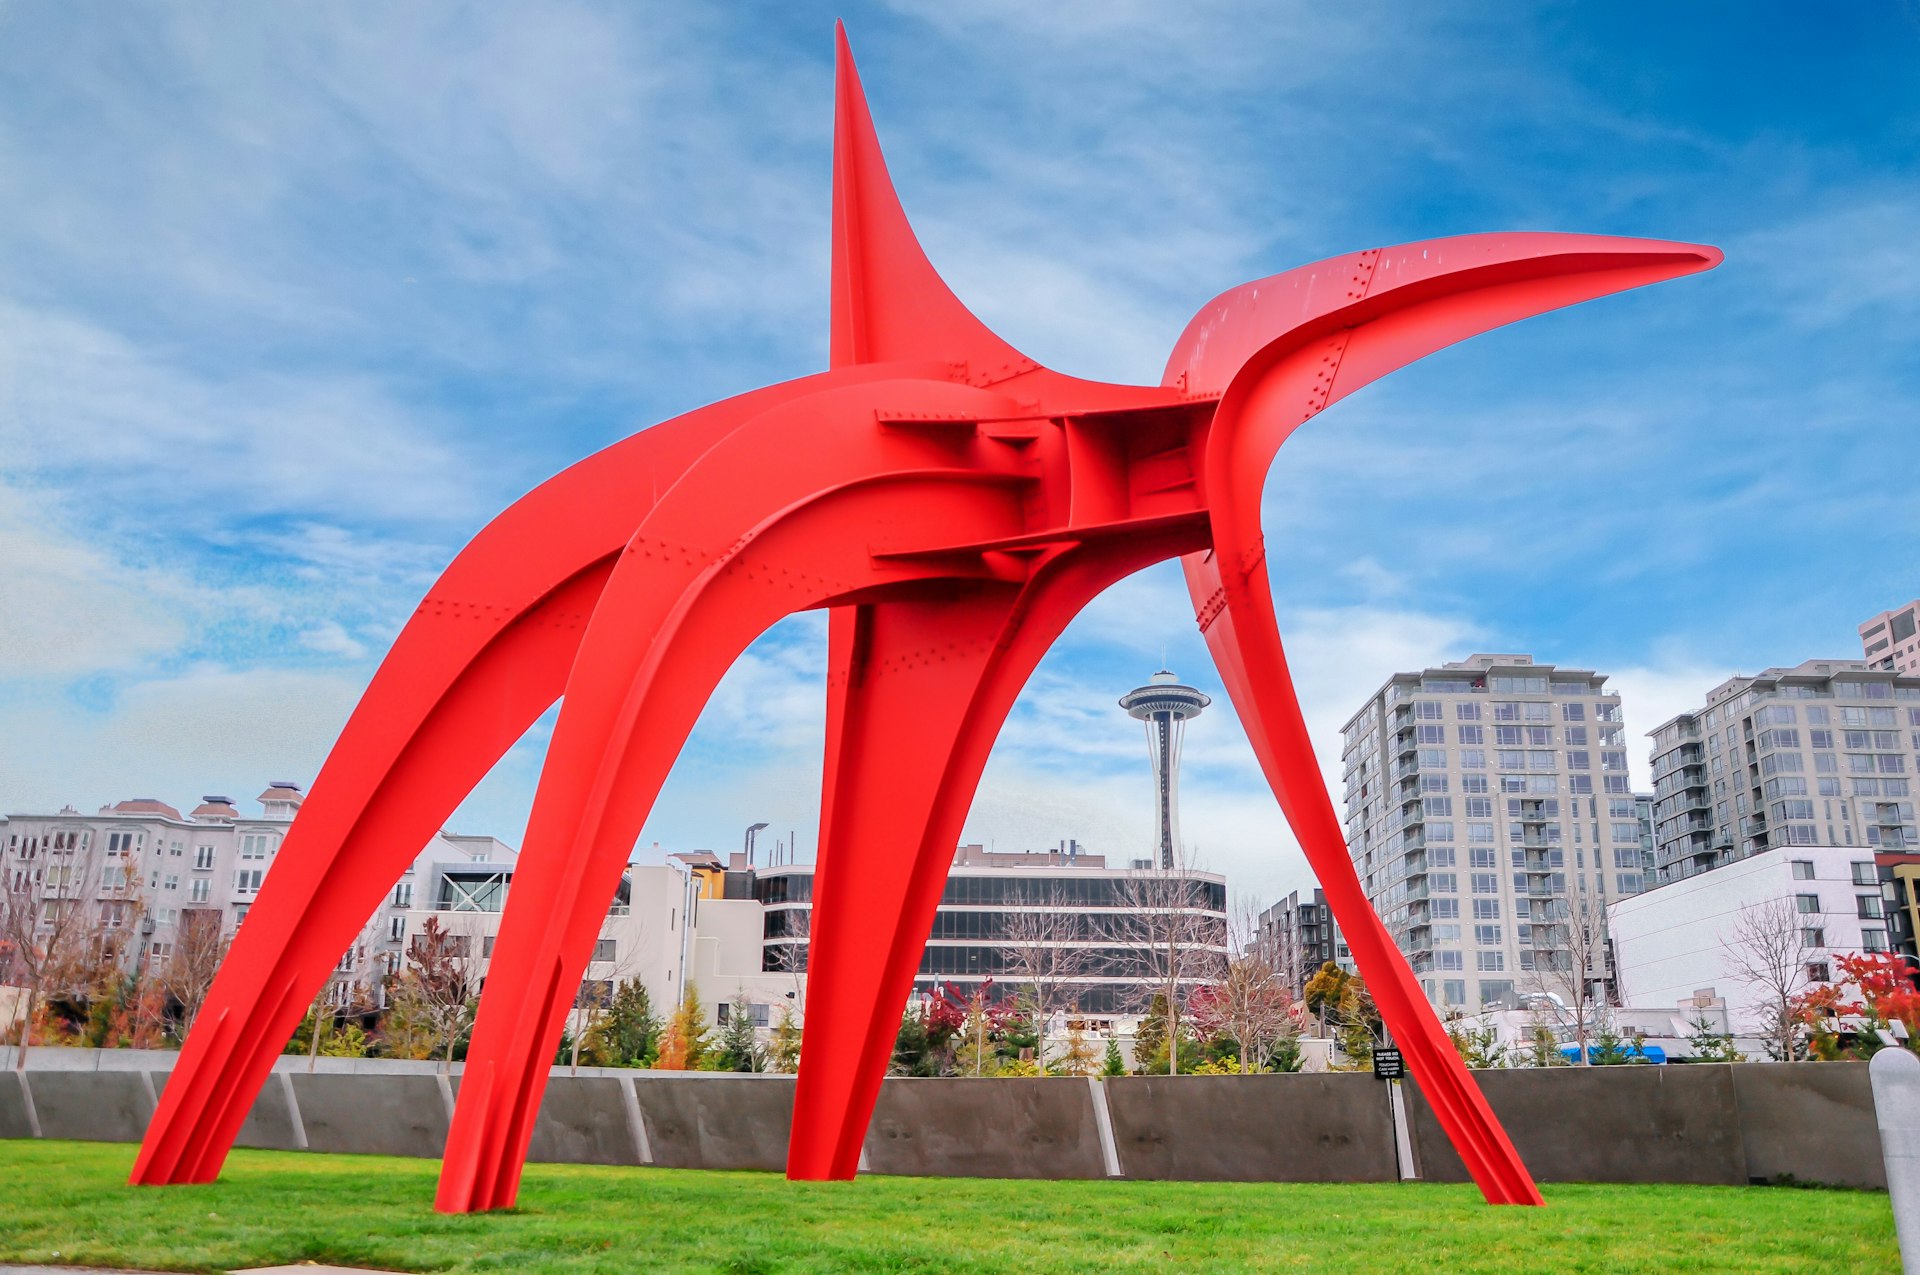 View of the Space Needle from Alexander Calder's Eagle